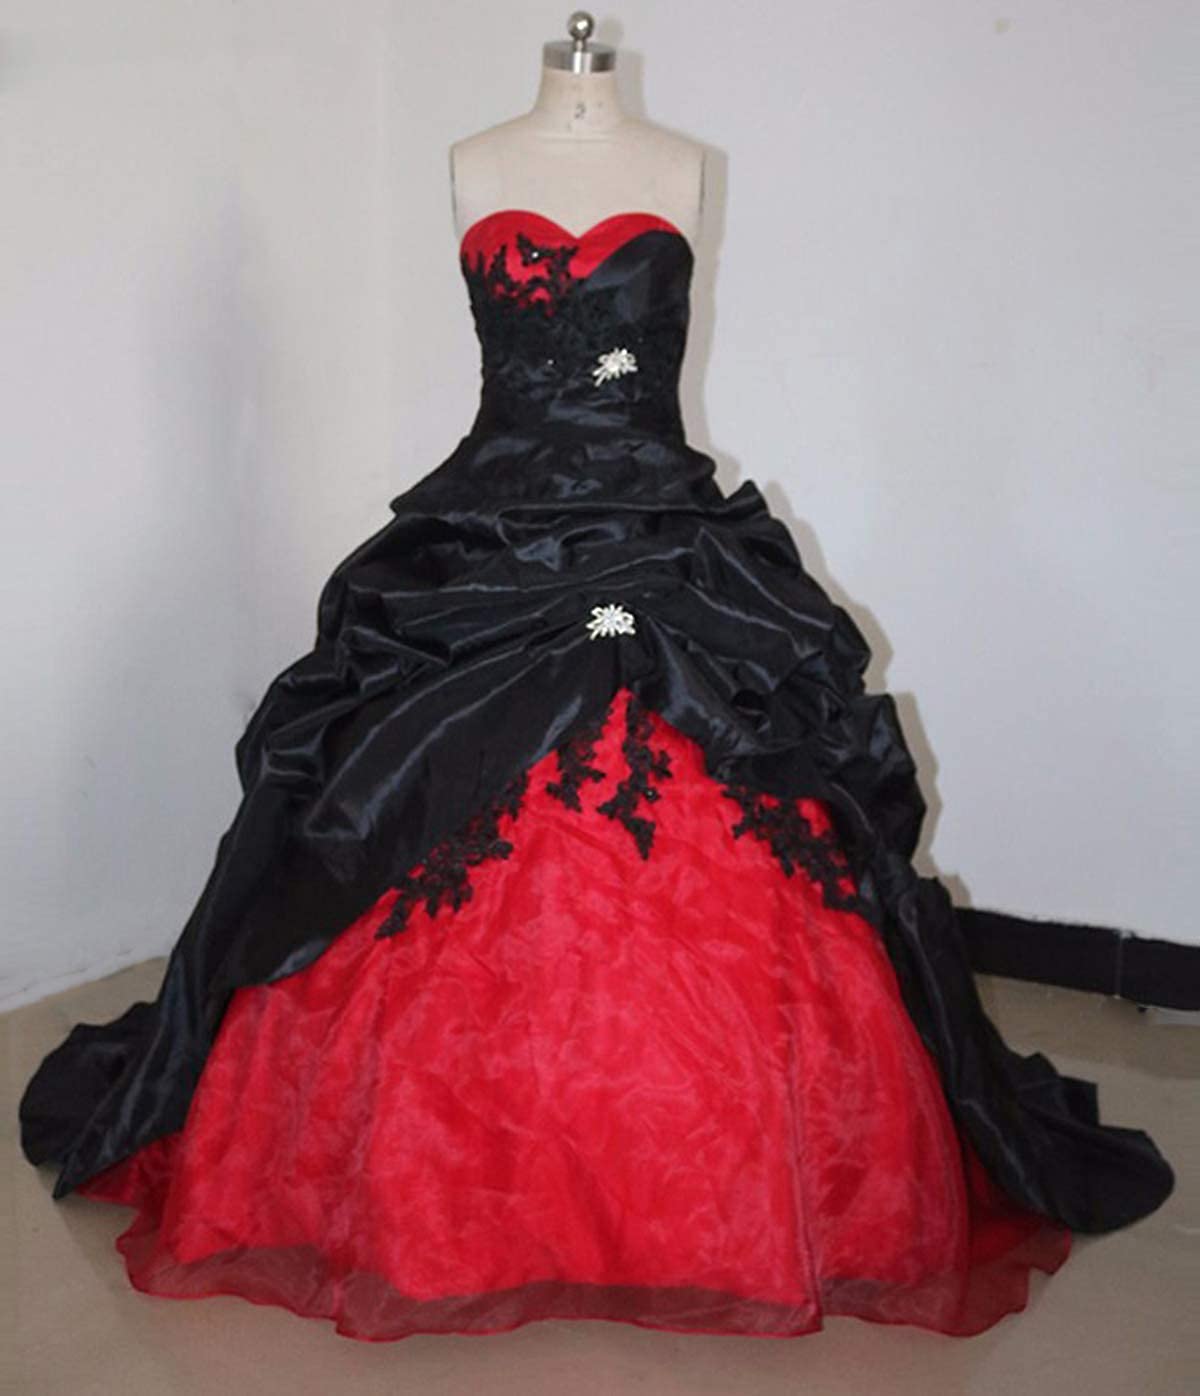 Strapless Ball Gown Wintage Taffeta Wedding Dresses Red Black Two Tone Bridal Gowns